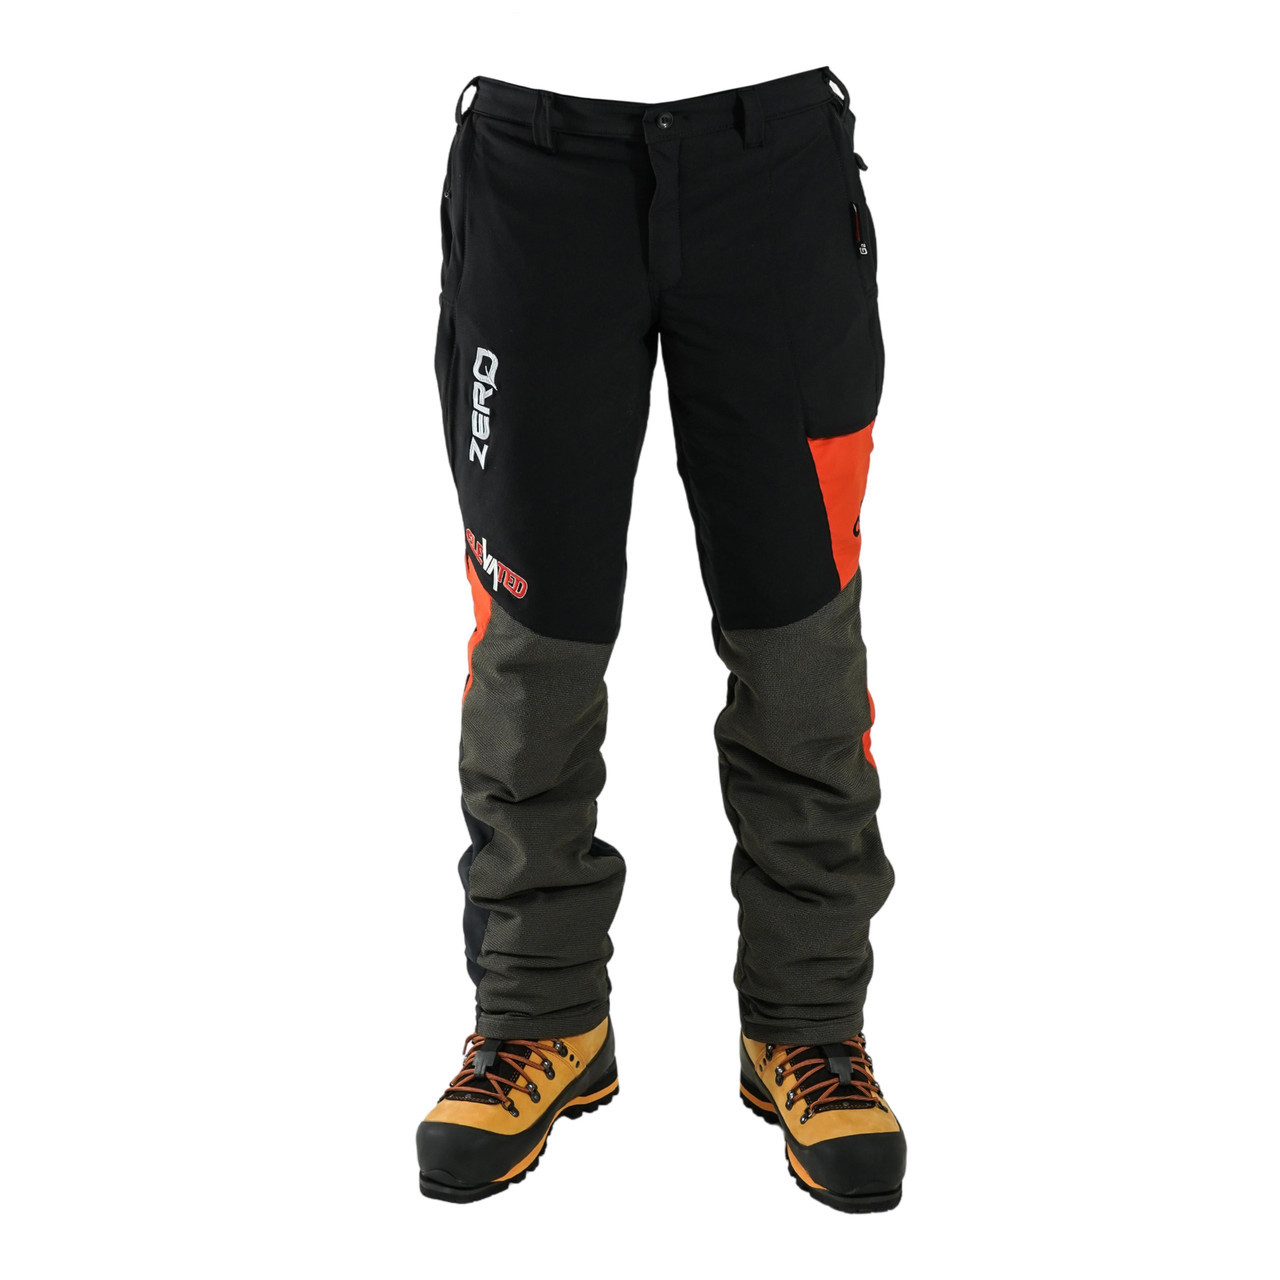 Defender Pro Gen2 Chainsaw Pants by Clogger